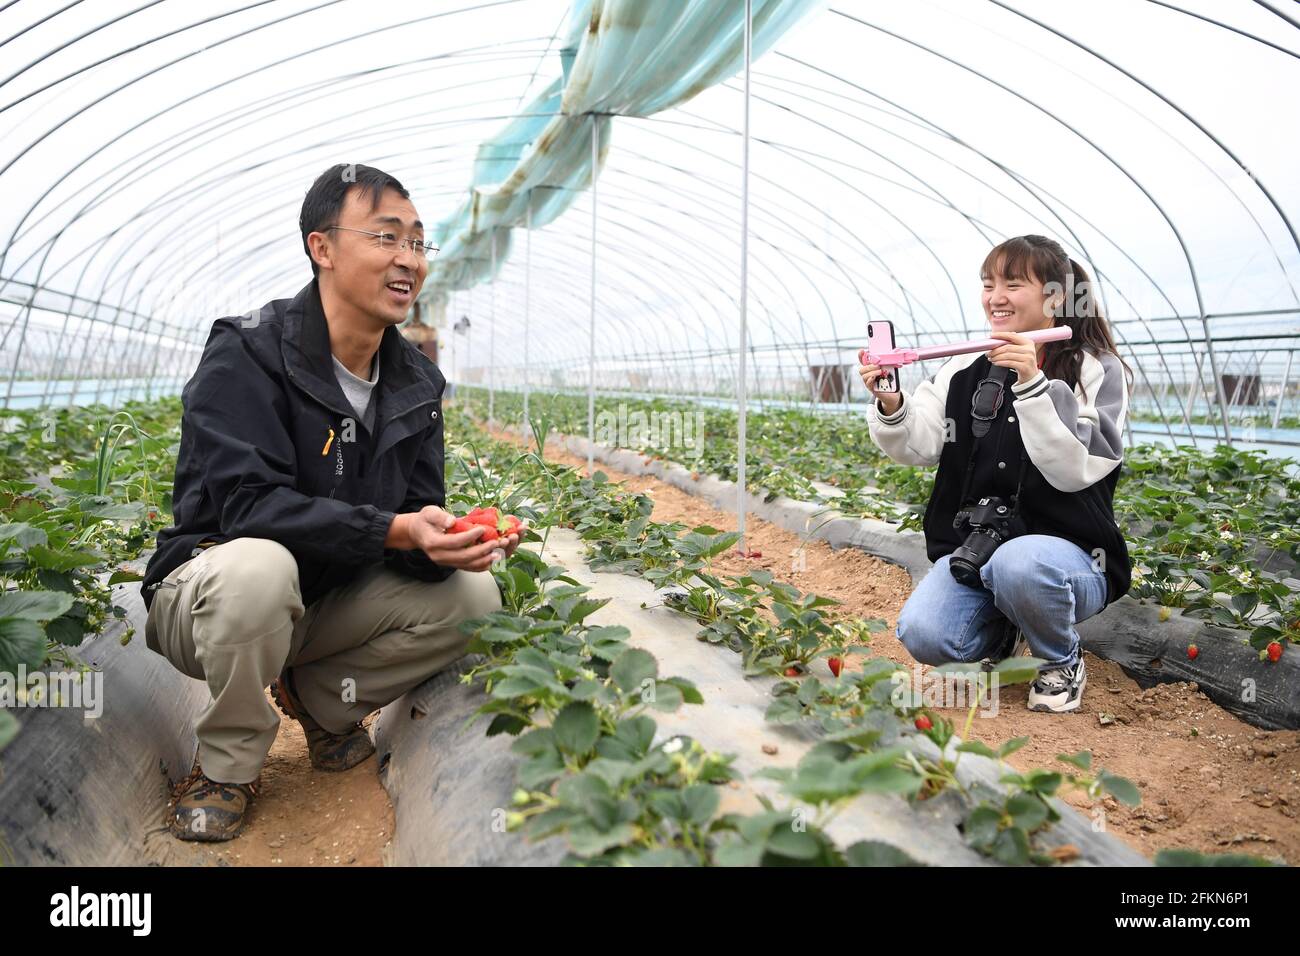 (210503) -- TIANSHUI, May 3, 2021 (Xinhua) -- Zhang Shuhao (L) promotes strawberries via on-line live streaming in a greenhouse in Mudan Township, Tianshui City of northwest China's Gansu Province, on April 27, 2021. Zhang Shuhao, 42, quit his well-paid job three years ago to start an agriculture company with a few partners sharing the same vision at a mountainous village in Mudan Township, Tianshui City. In three years, Xinghuarong, Zhang's company, contracted 6,200 mu (about 413 hectares) of idle arable lands, where terraced fields, greenhouses, and a reservoir have been built to grow diver Stock Photo